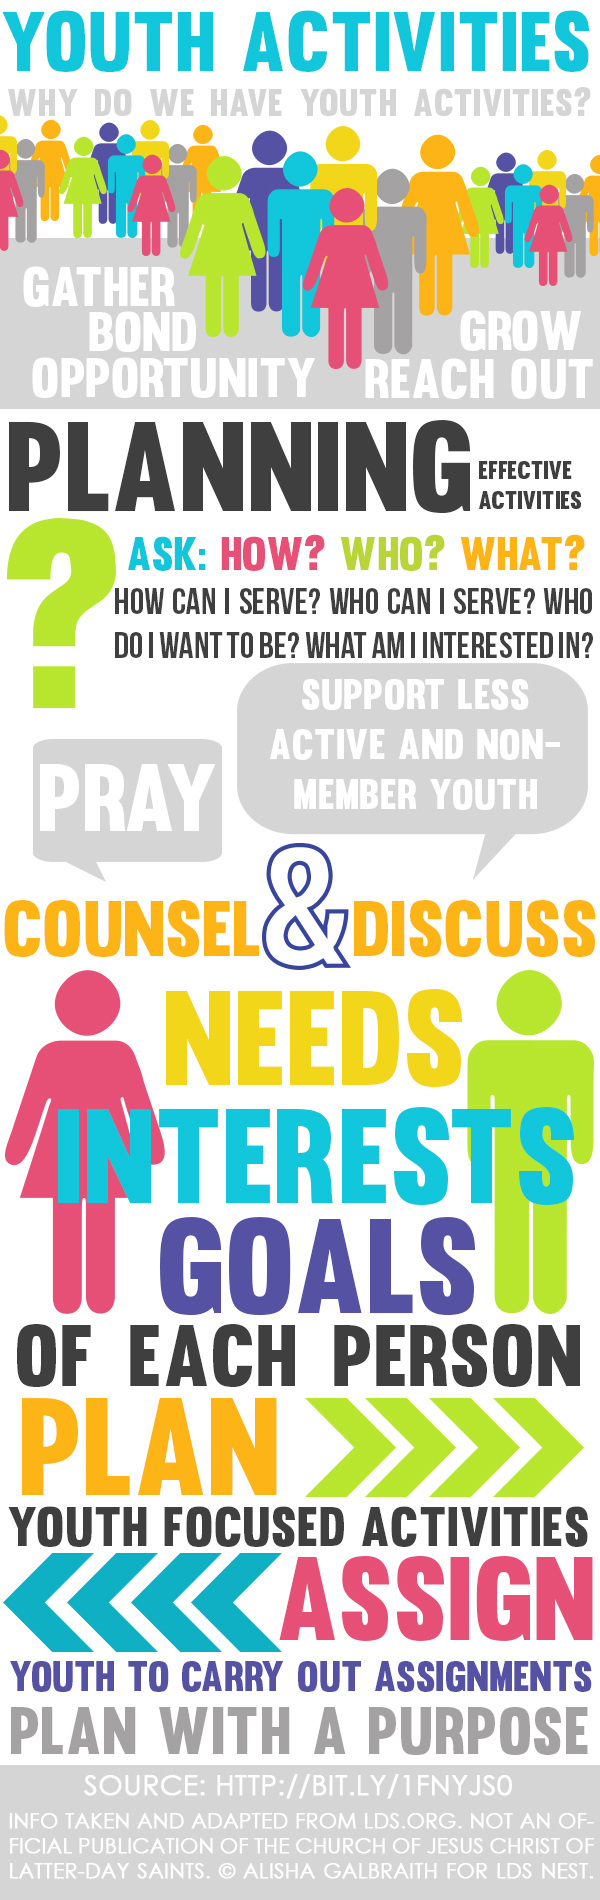 Youth activities infographic from LDSNEST.COM Why do we have youth activities and how to plan them #lds #ldsyouth #ldsleadership #leadership